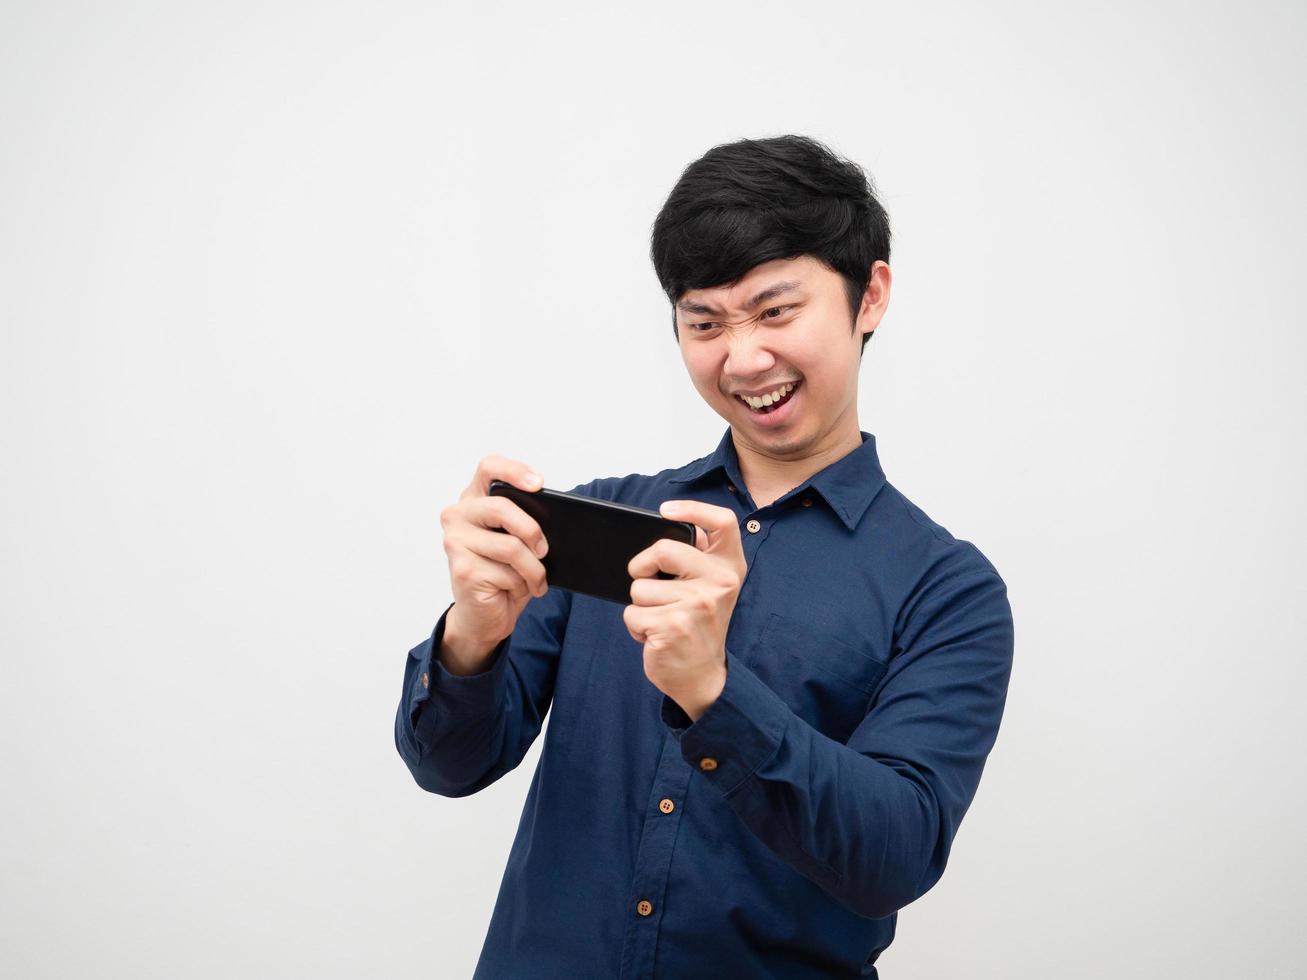 Asian man playing game on mobilephone feeling fun on white background photo